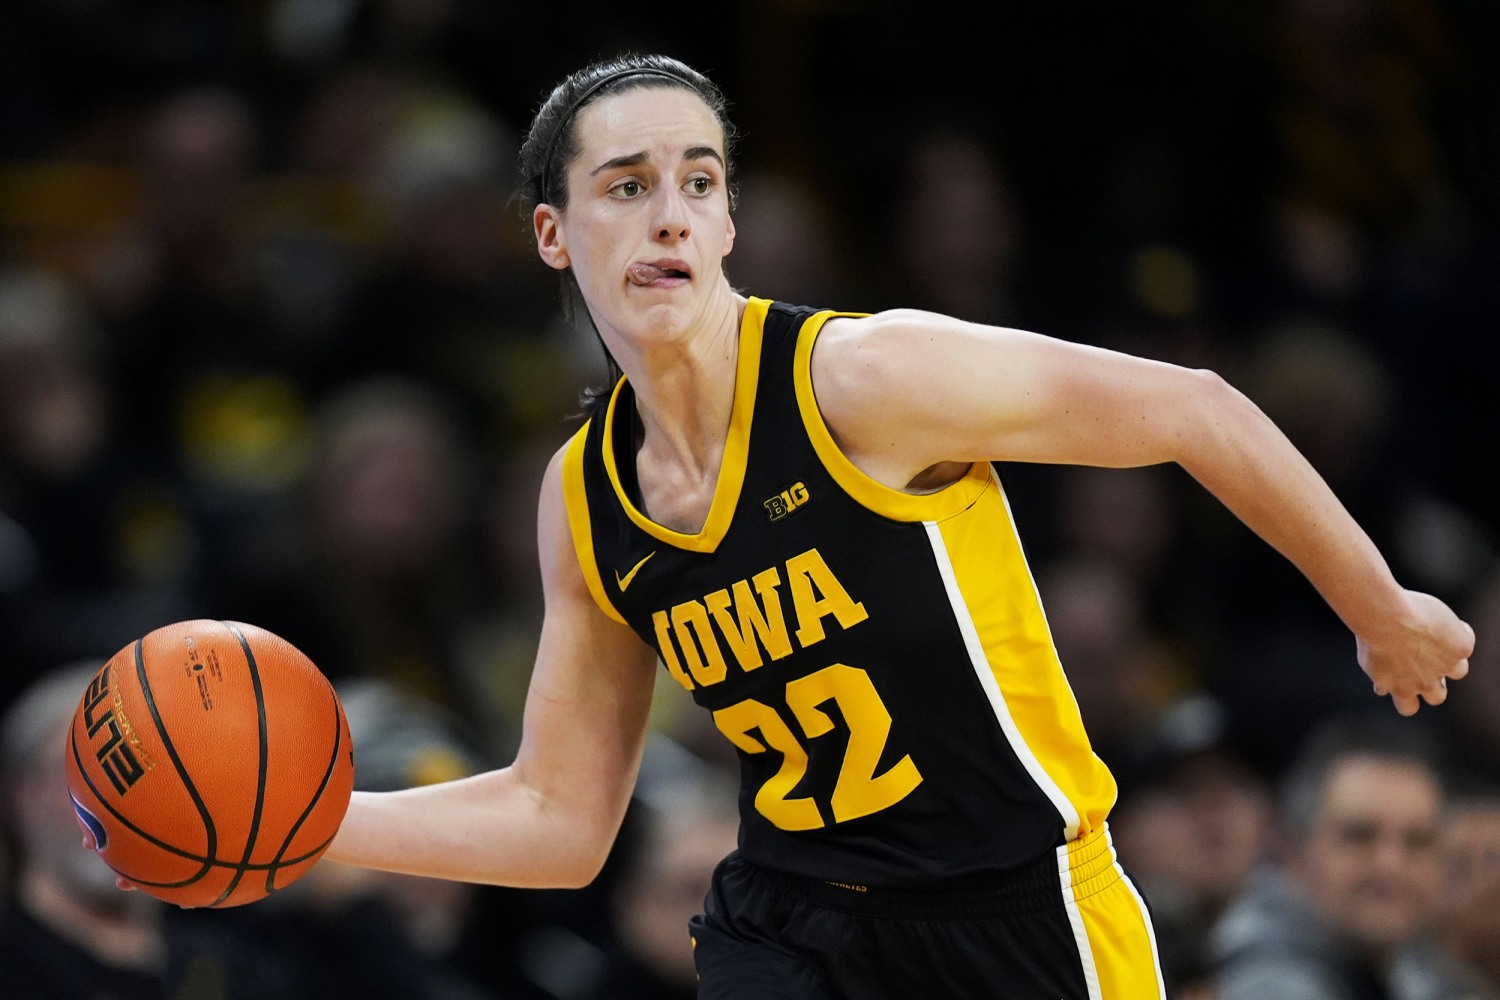 Caitlin Clark knocked down and 'blindsided' by fan running onto court after  Iowa lost to Ohio State